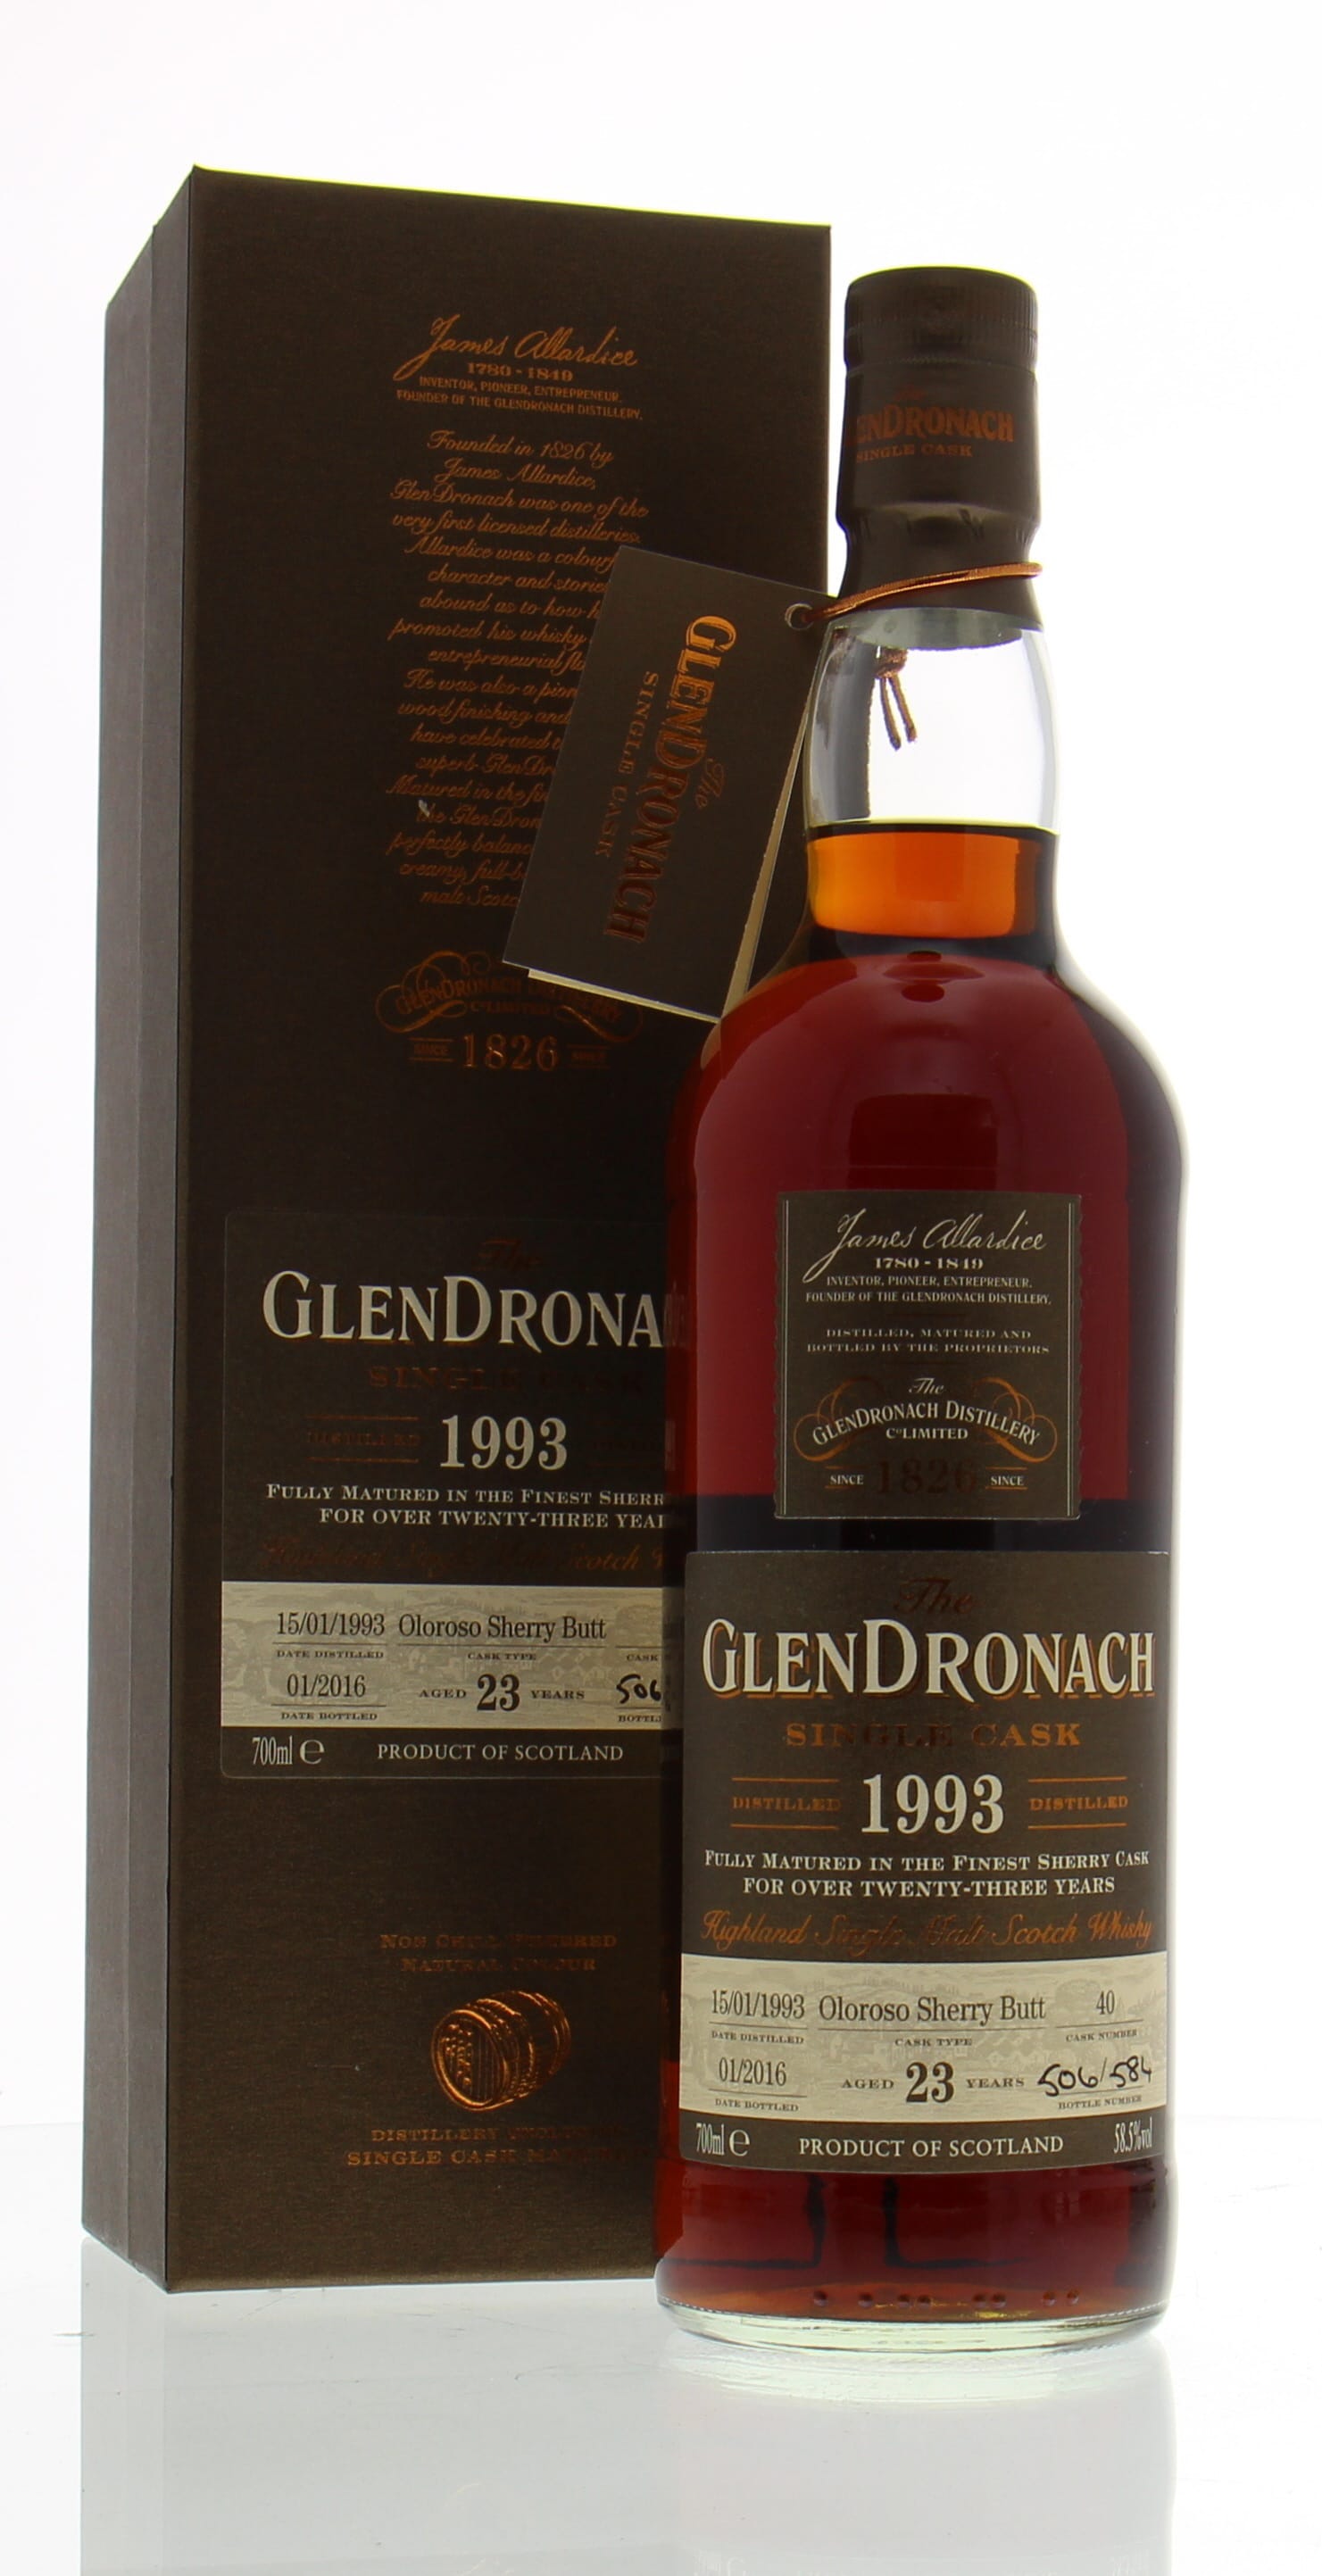 Glendronach - 23 Years Old Batch 13 Cask:40 1993 In Original Container